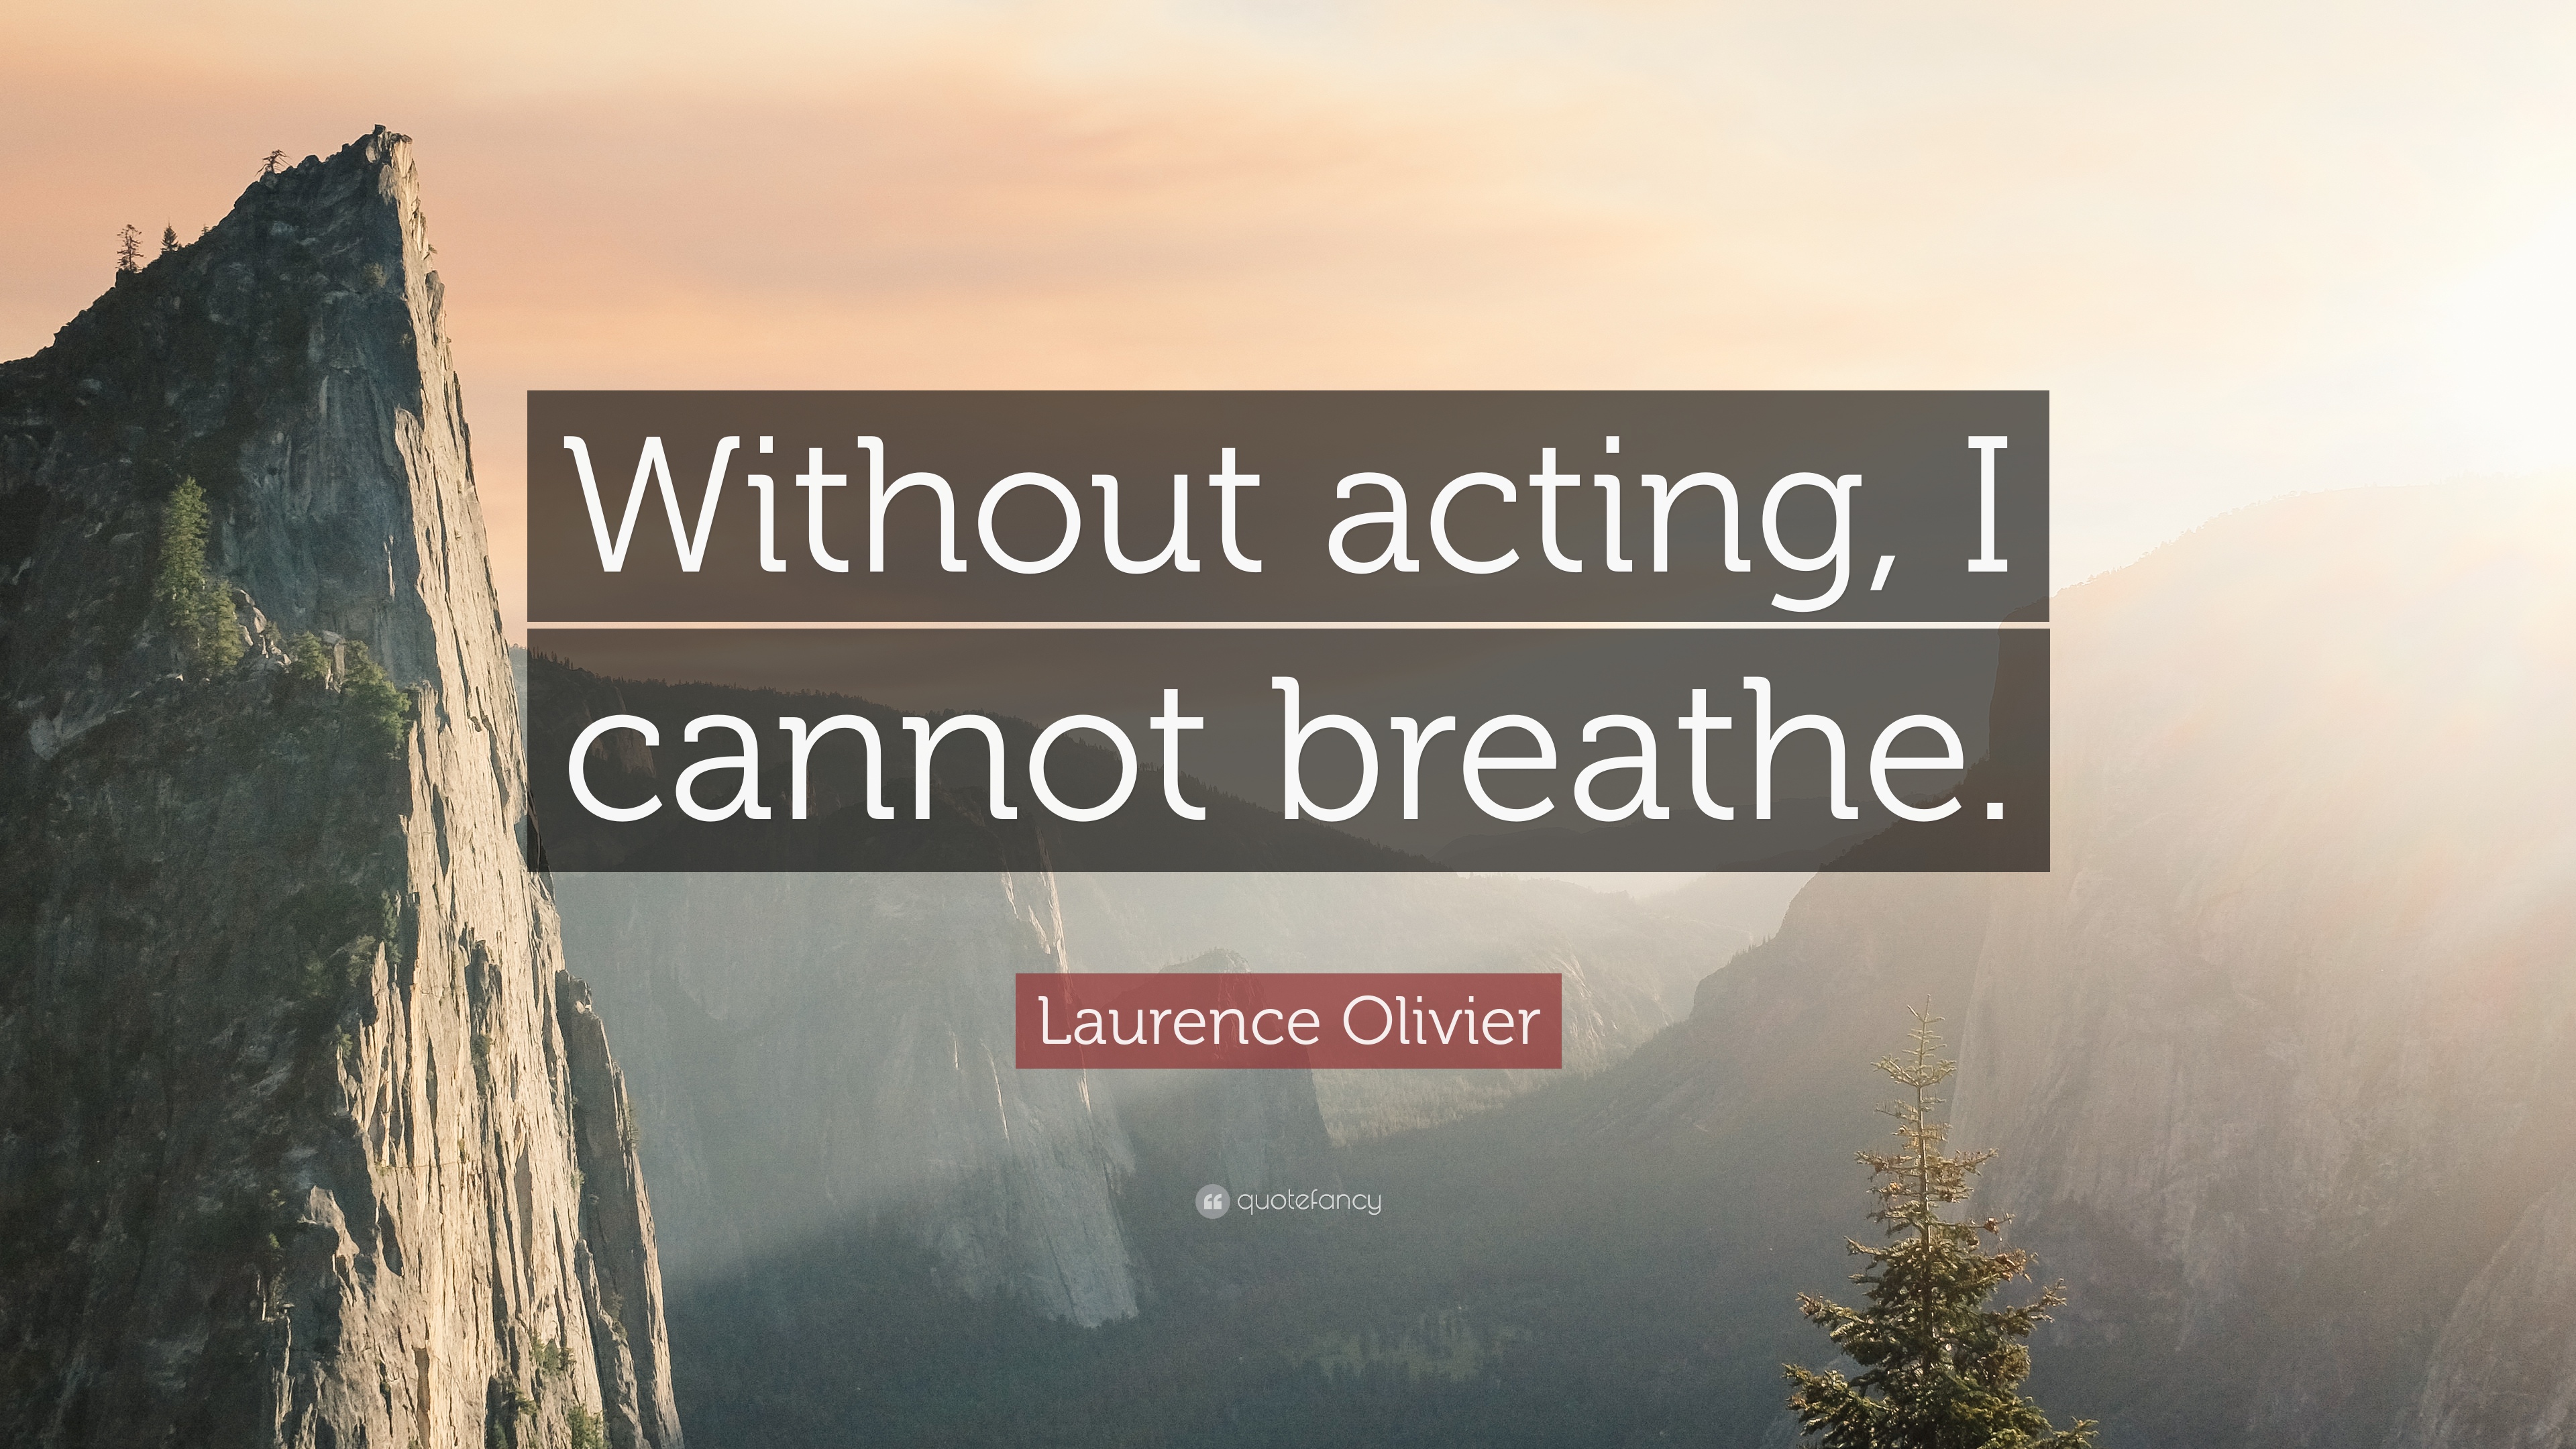 Laurence Olivier Quote: “Without acting, I cannot breathe.” 7